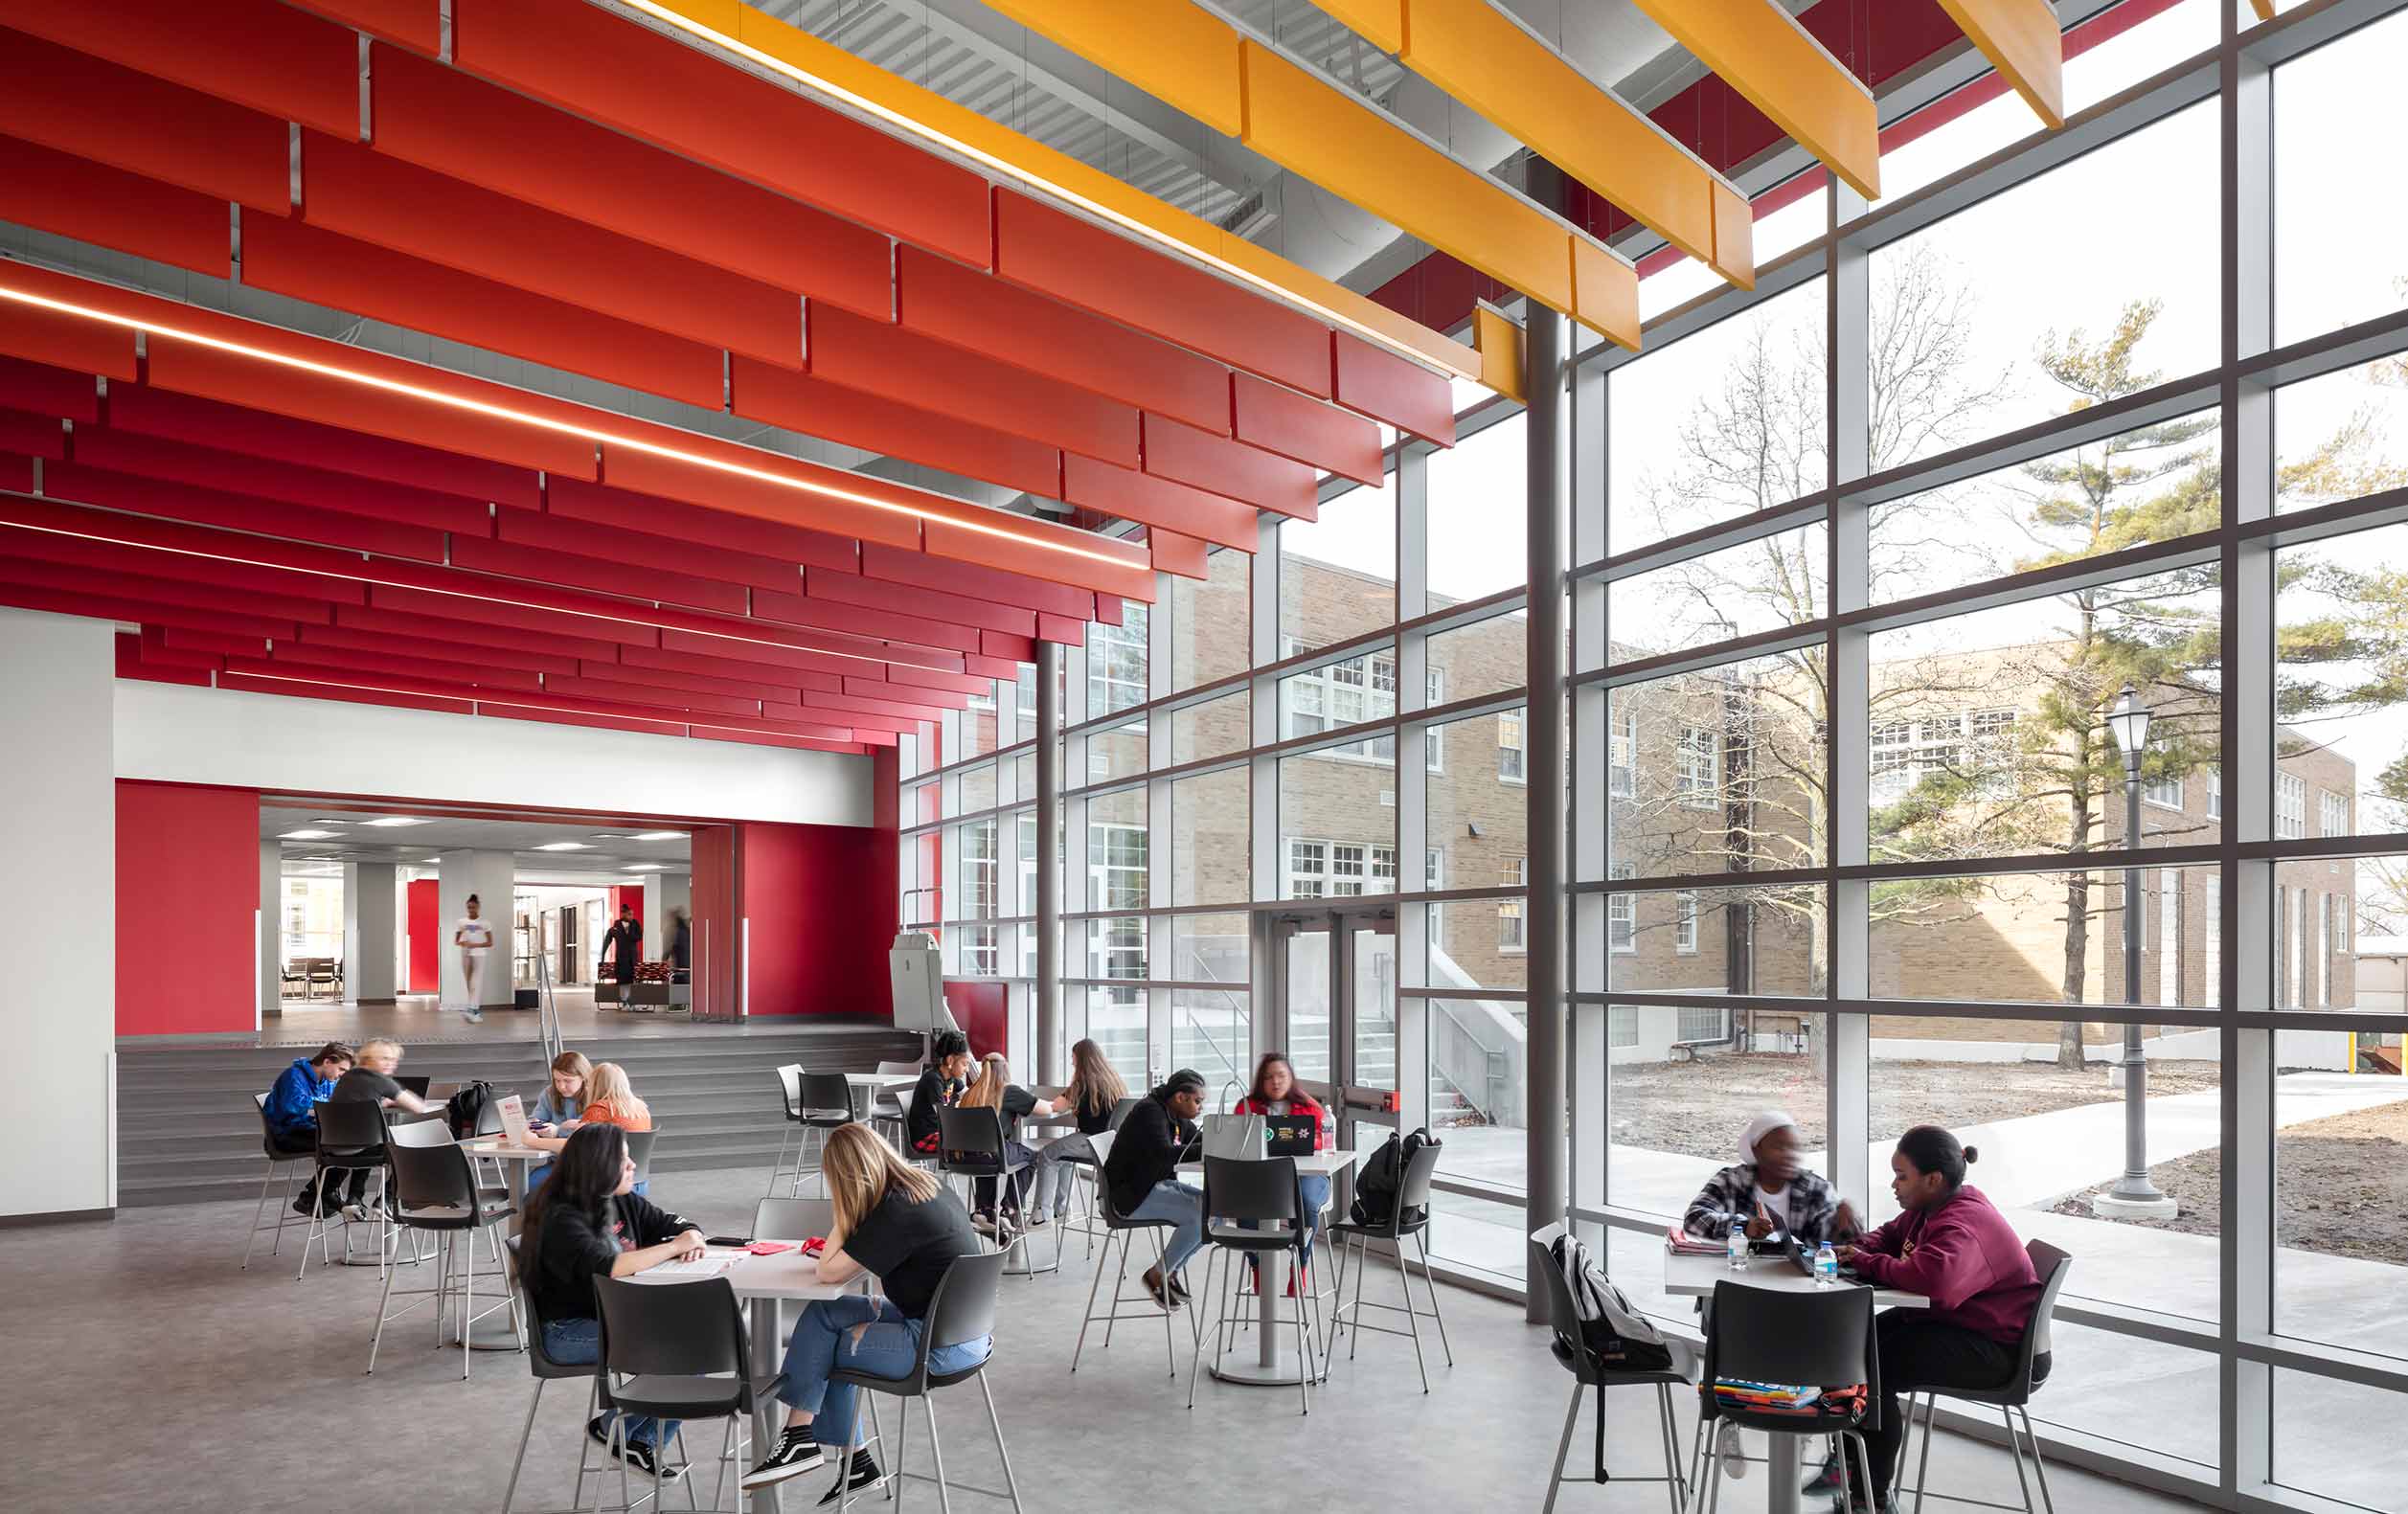 High school students in commons with red and yellow ceiling highlights and glass wall displaying courtyard